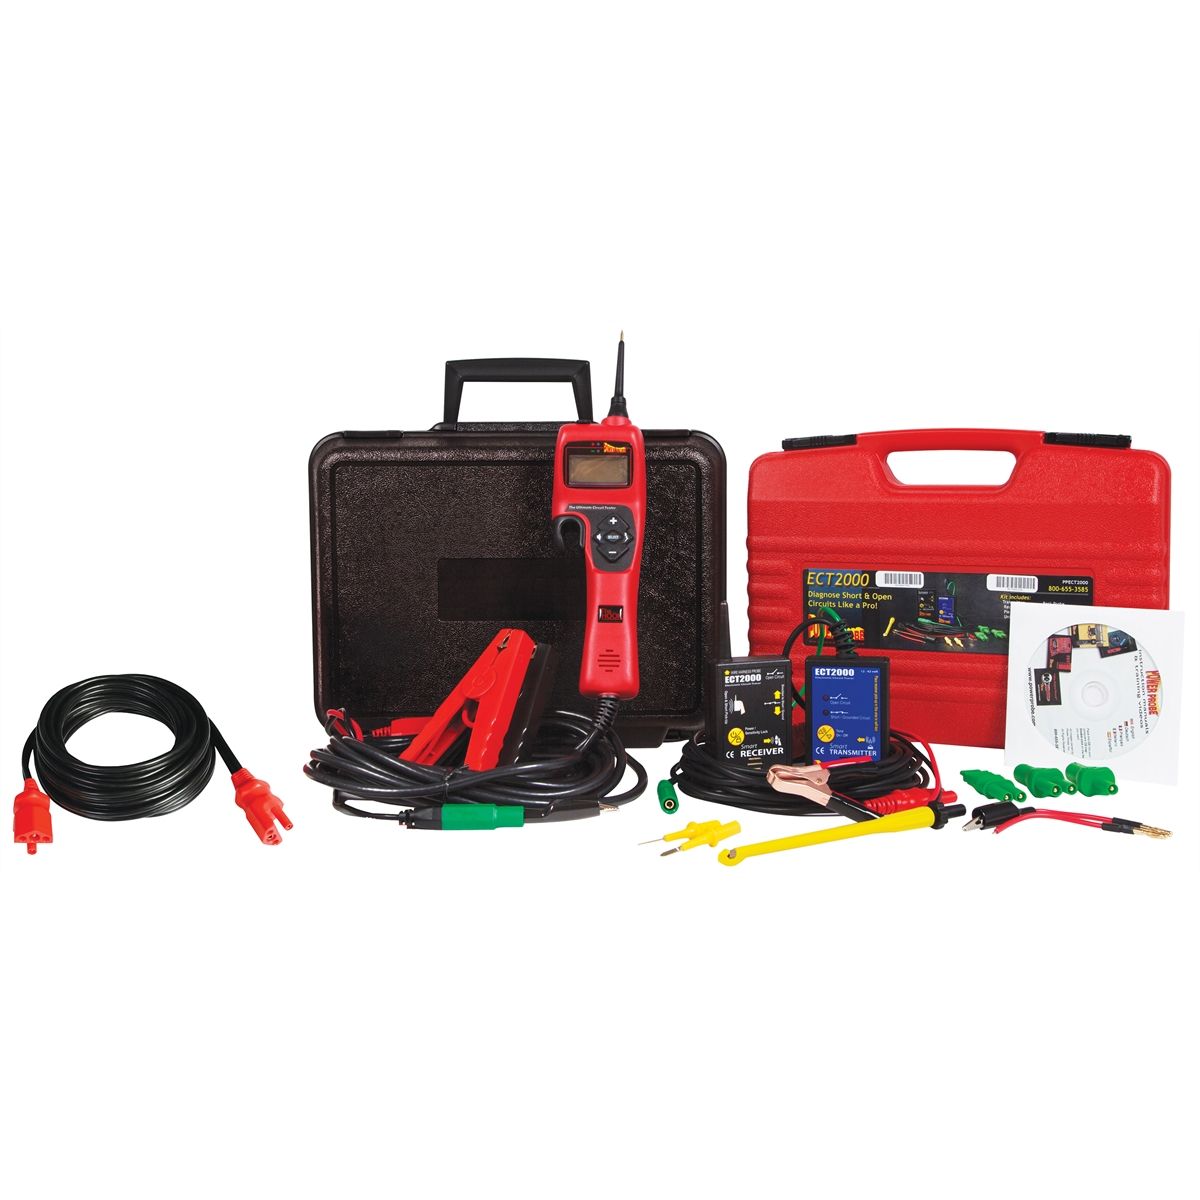 Power Probe Heavy Duty Electrical Diagnostic Pack PPHDDP1